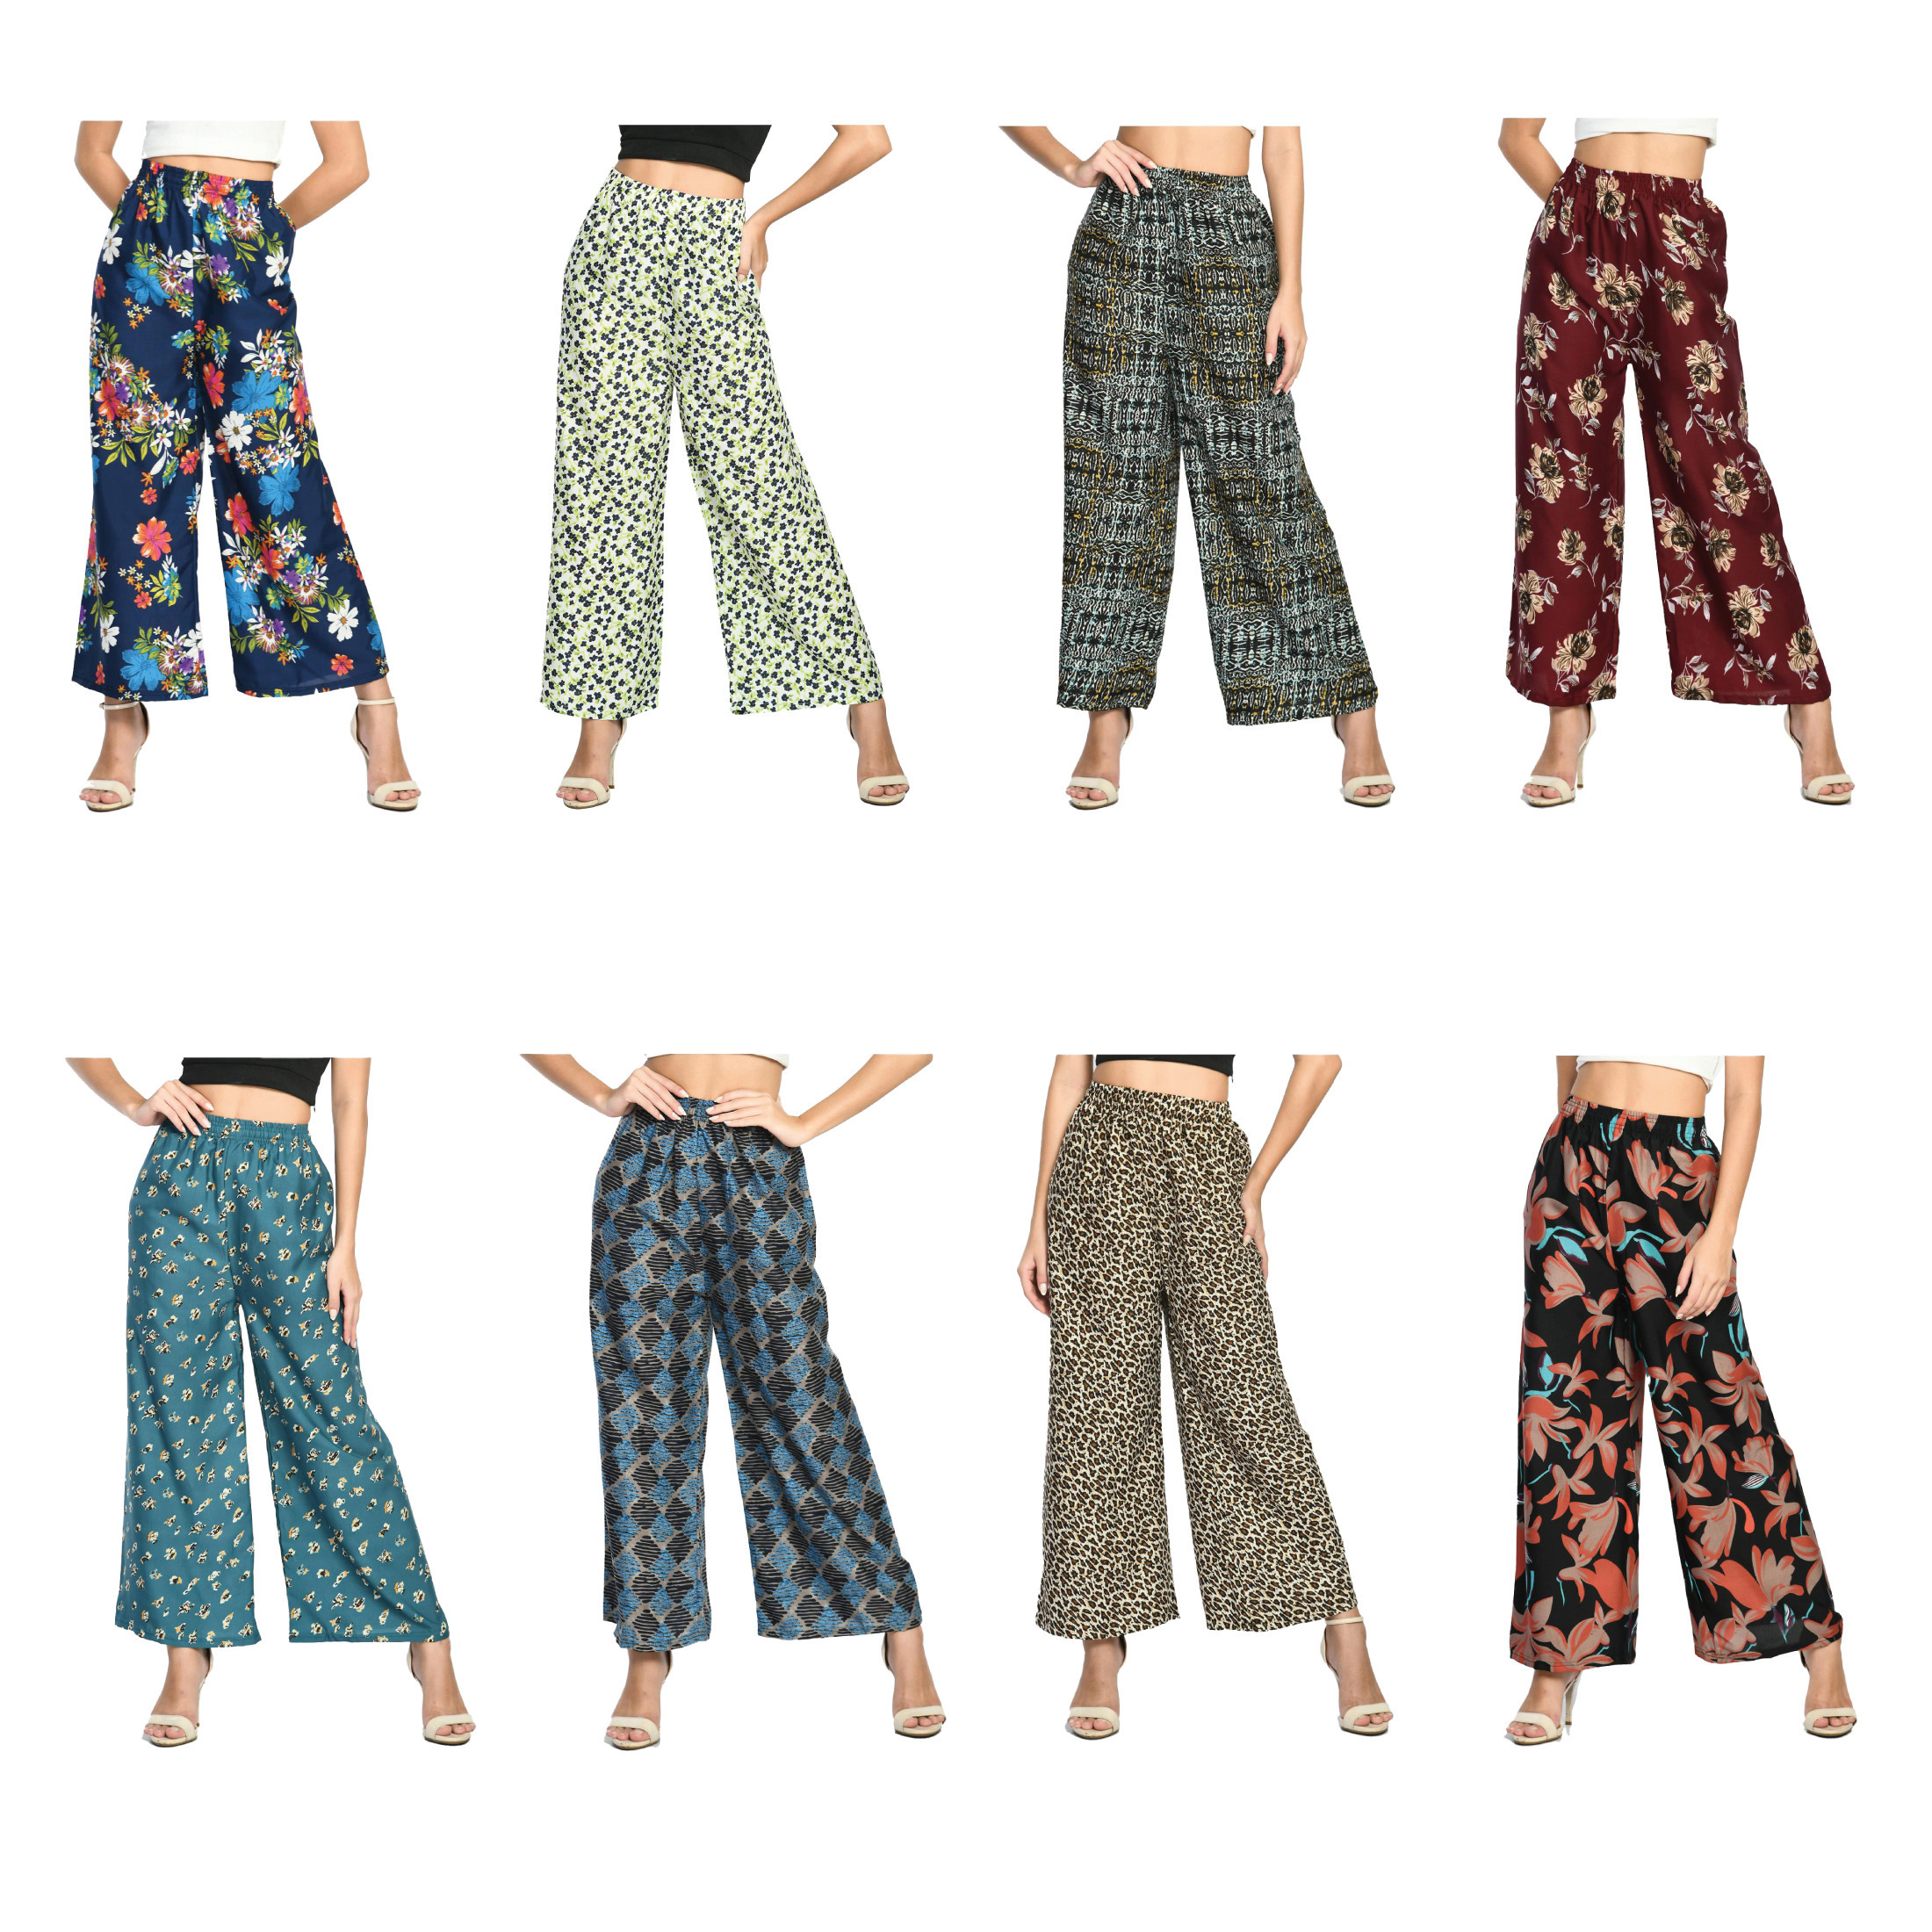 4-Pack: Ladies Soft Stylish Chic Cotton Blended Comfort Printed Pants